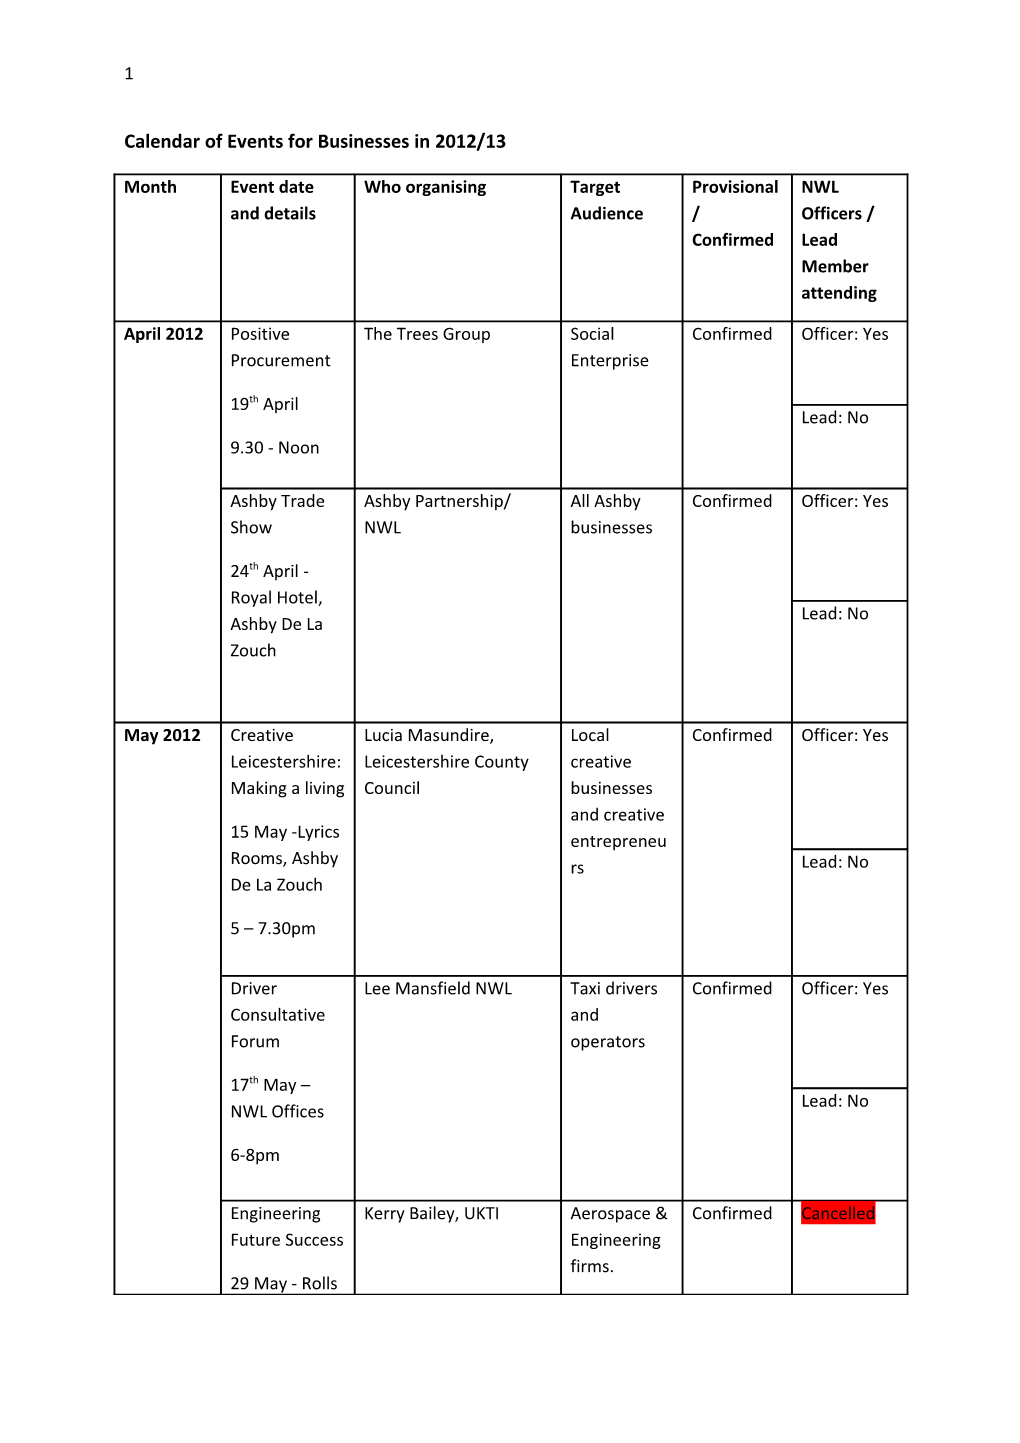 Calendar of Events for Businesses in 2012/13